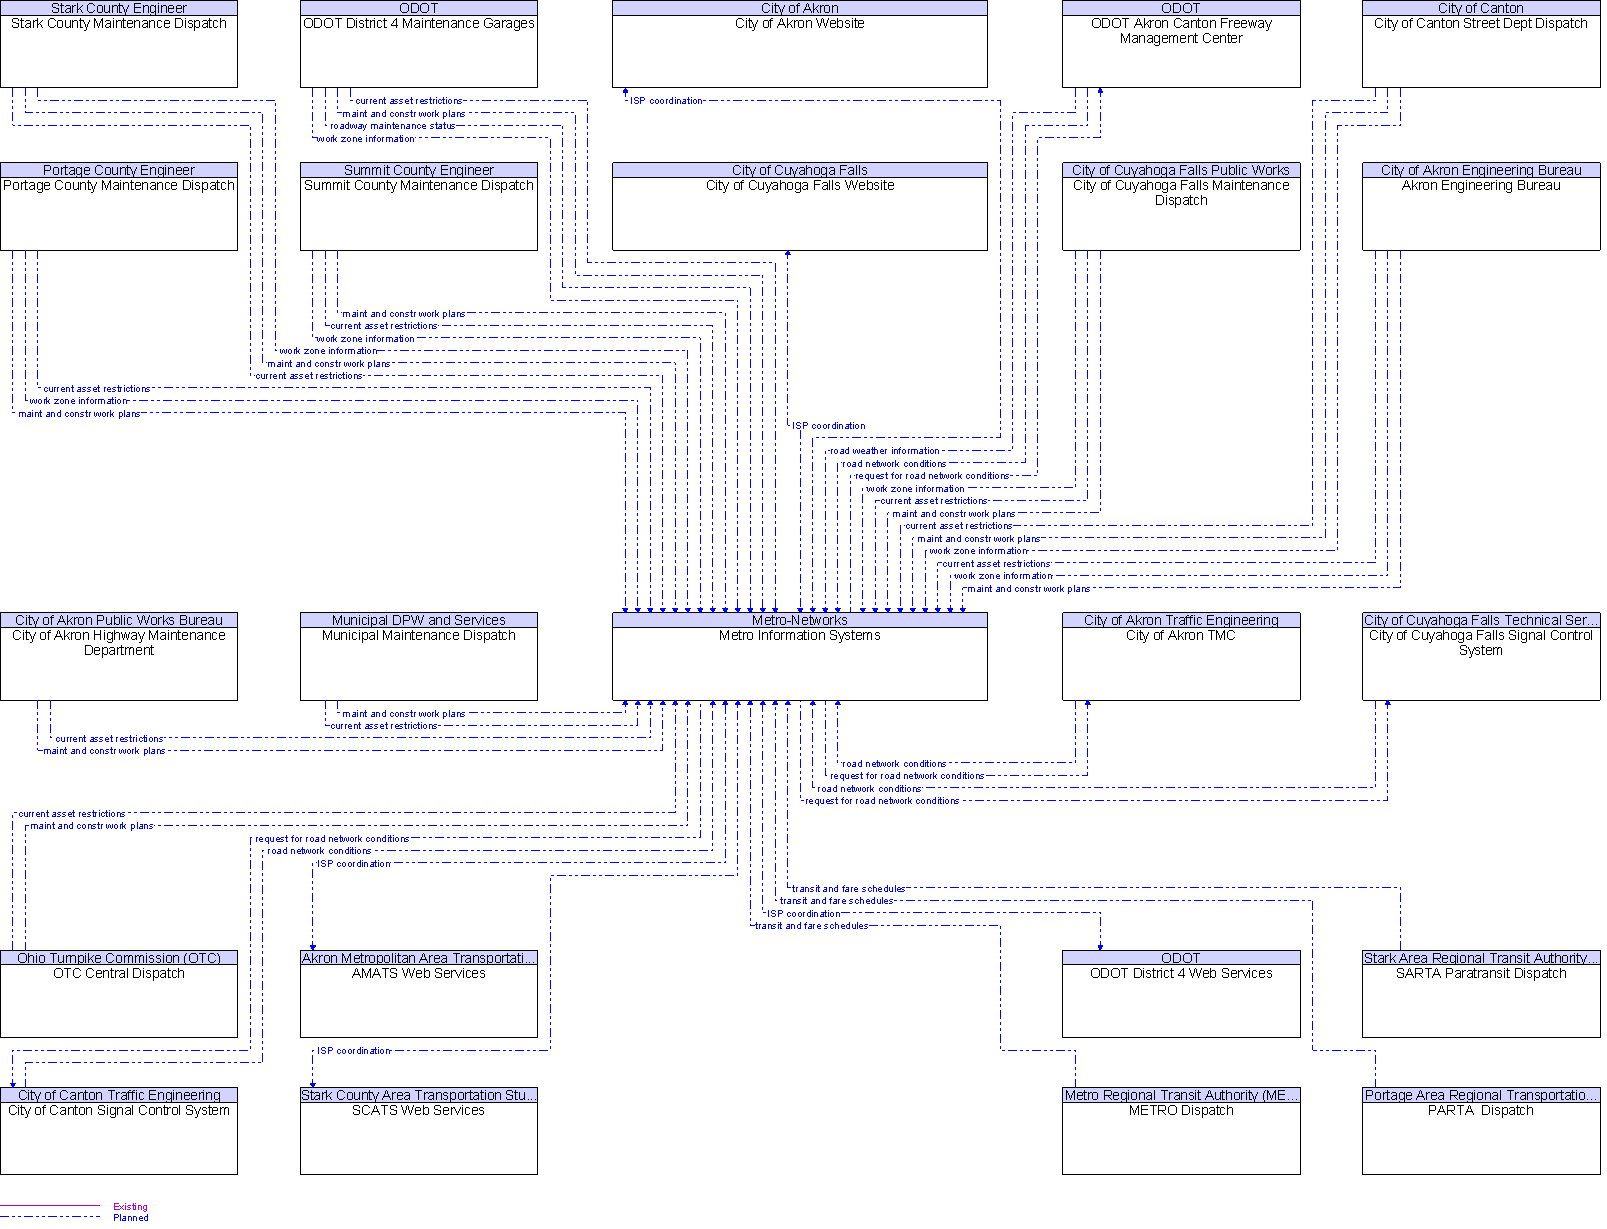 Context Diagram for Metro Information Systems